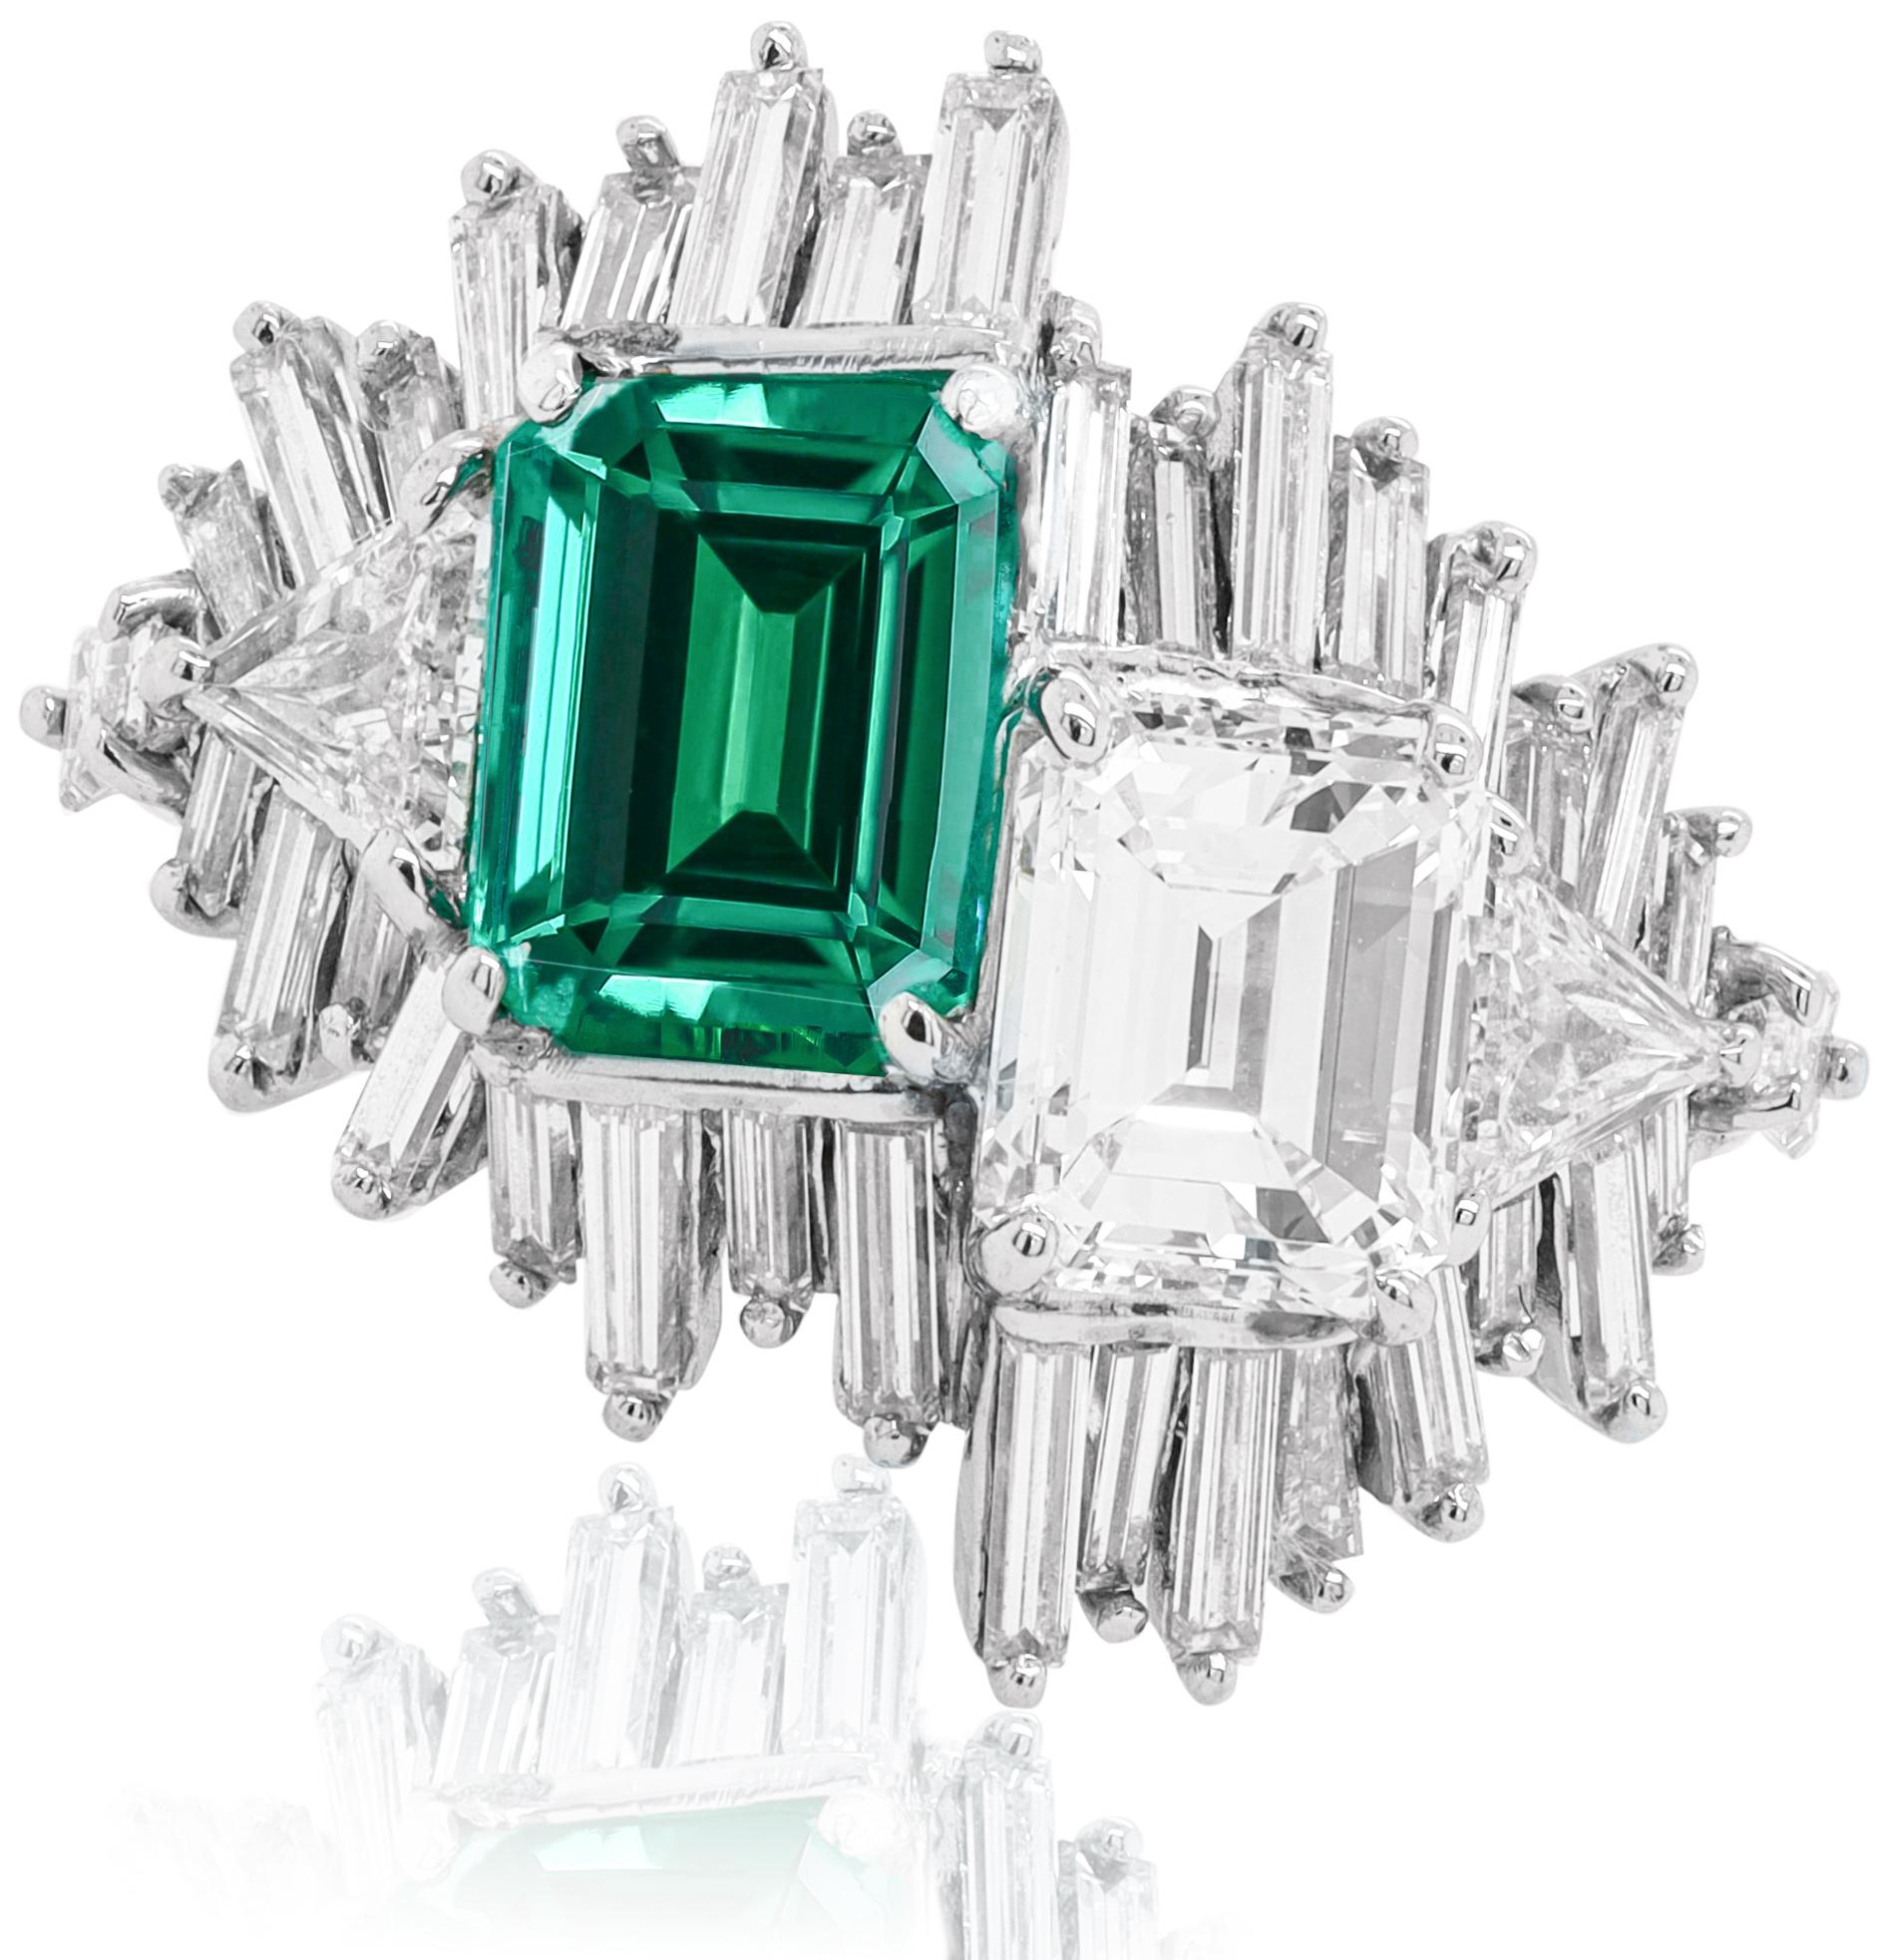 Platinum emerald and diamond ring featuring a 2.15 ct emerald and a 2.03 ct white diamond offset from each other surrounded by long baguette cut diamonds totaling 2.00 cts tw of diamonds (C.Dunaigre certified)
Diana M. is a leading supplier of